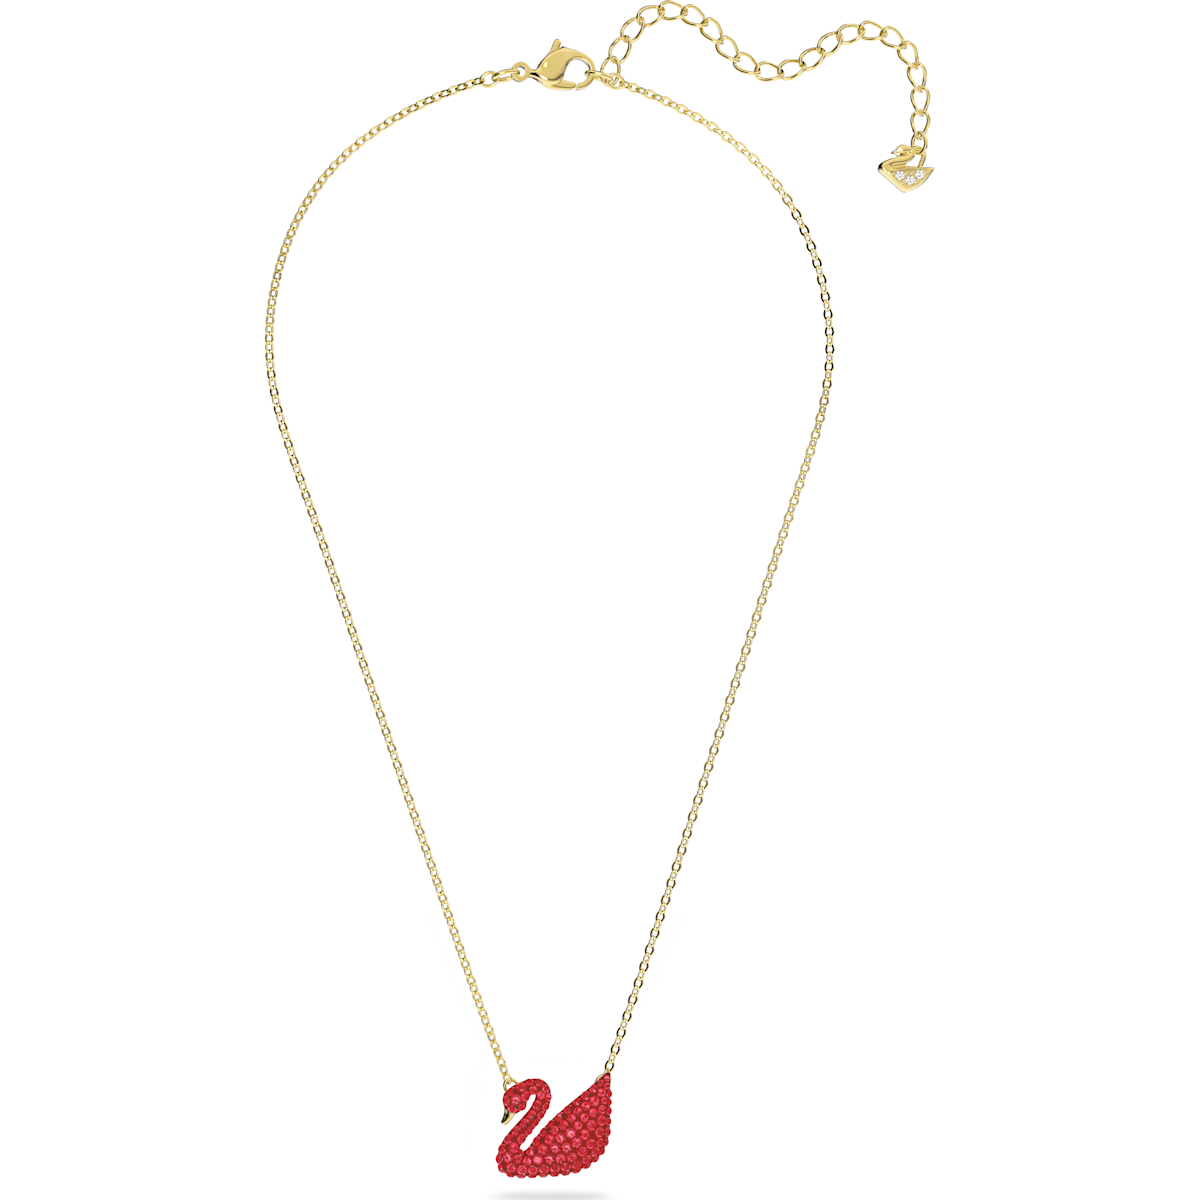 Swarovski - SS ICONIC SWAN:PEND RED INSI/CRY/GOS - CRYSTAL UNTERBERGER